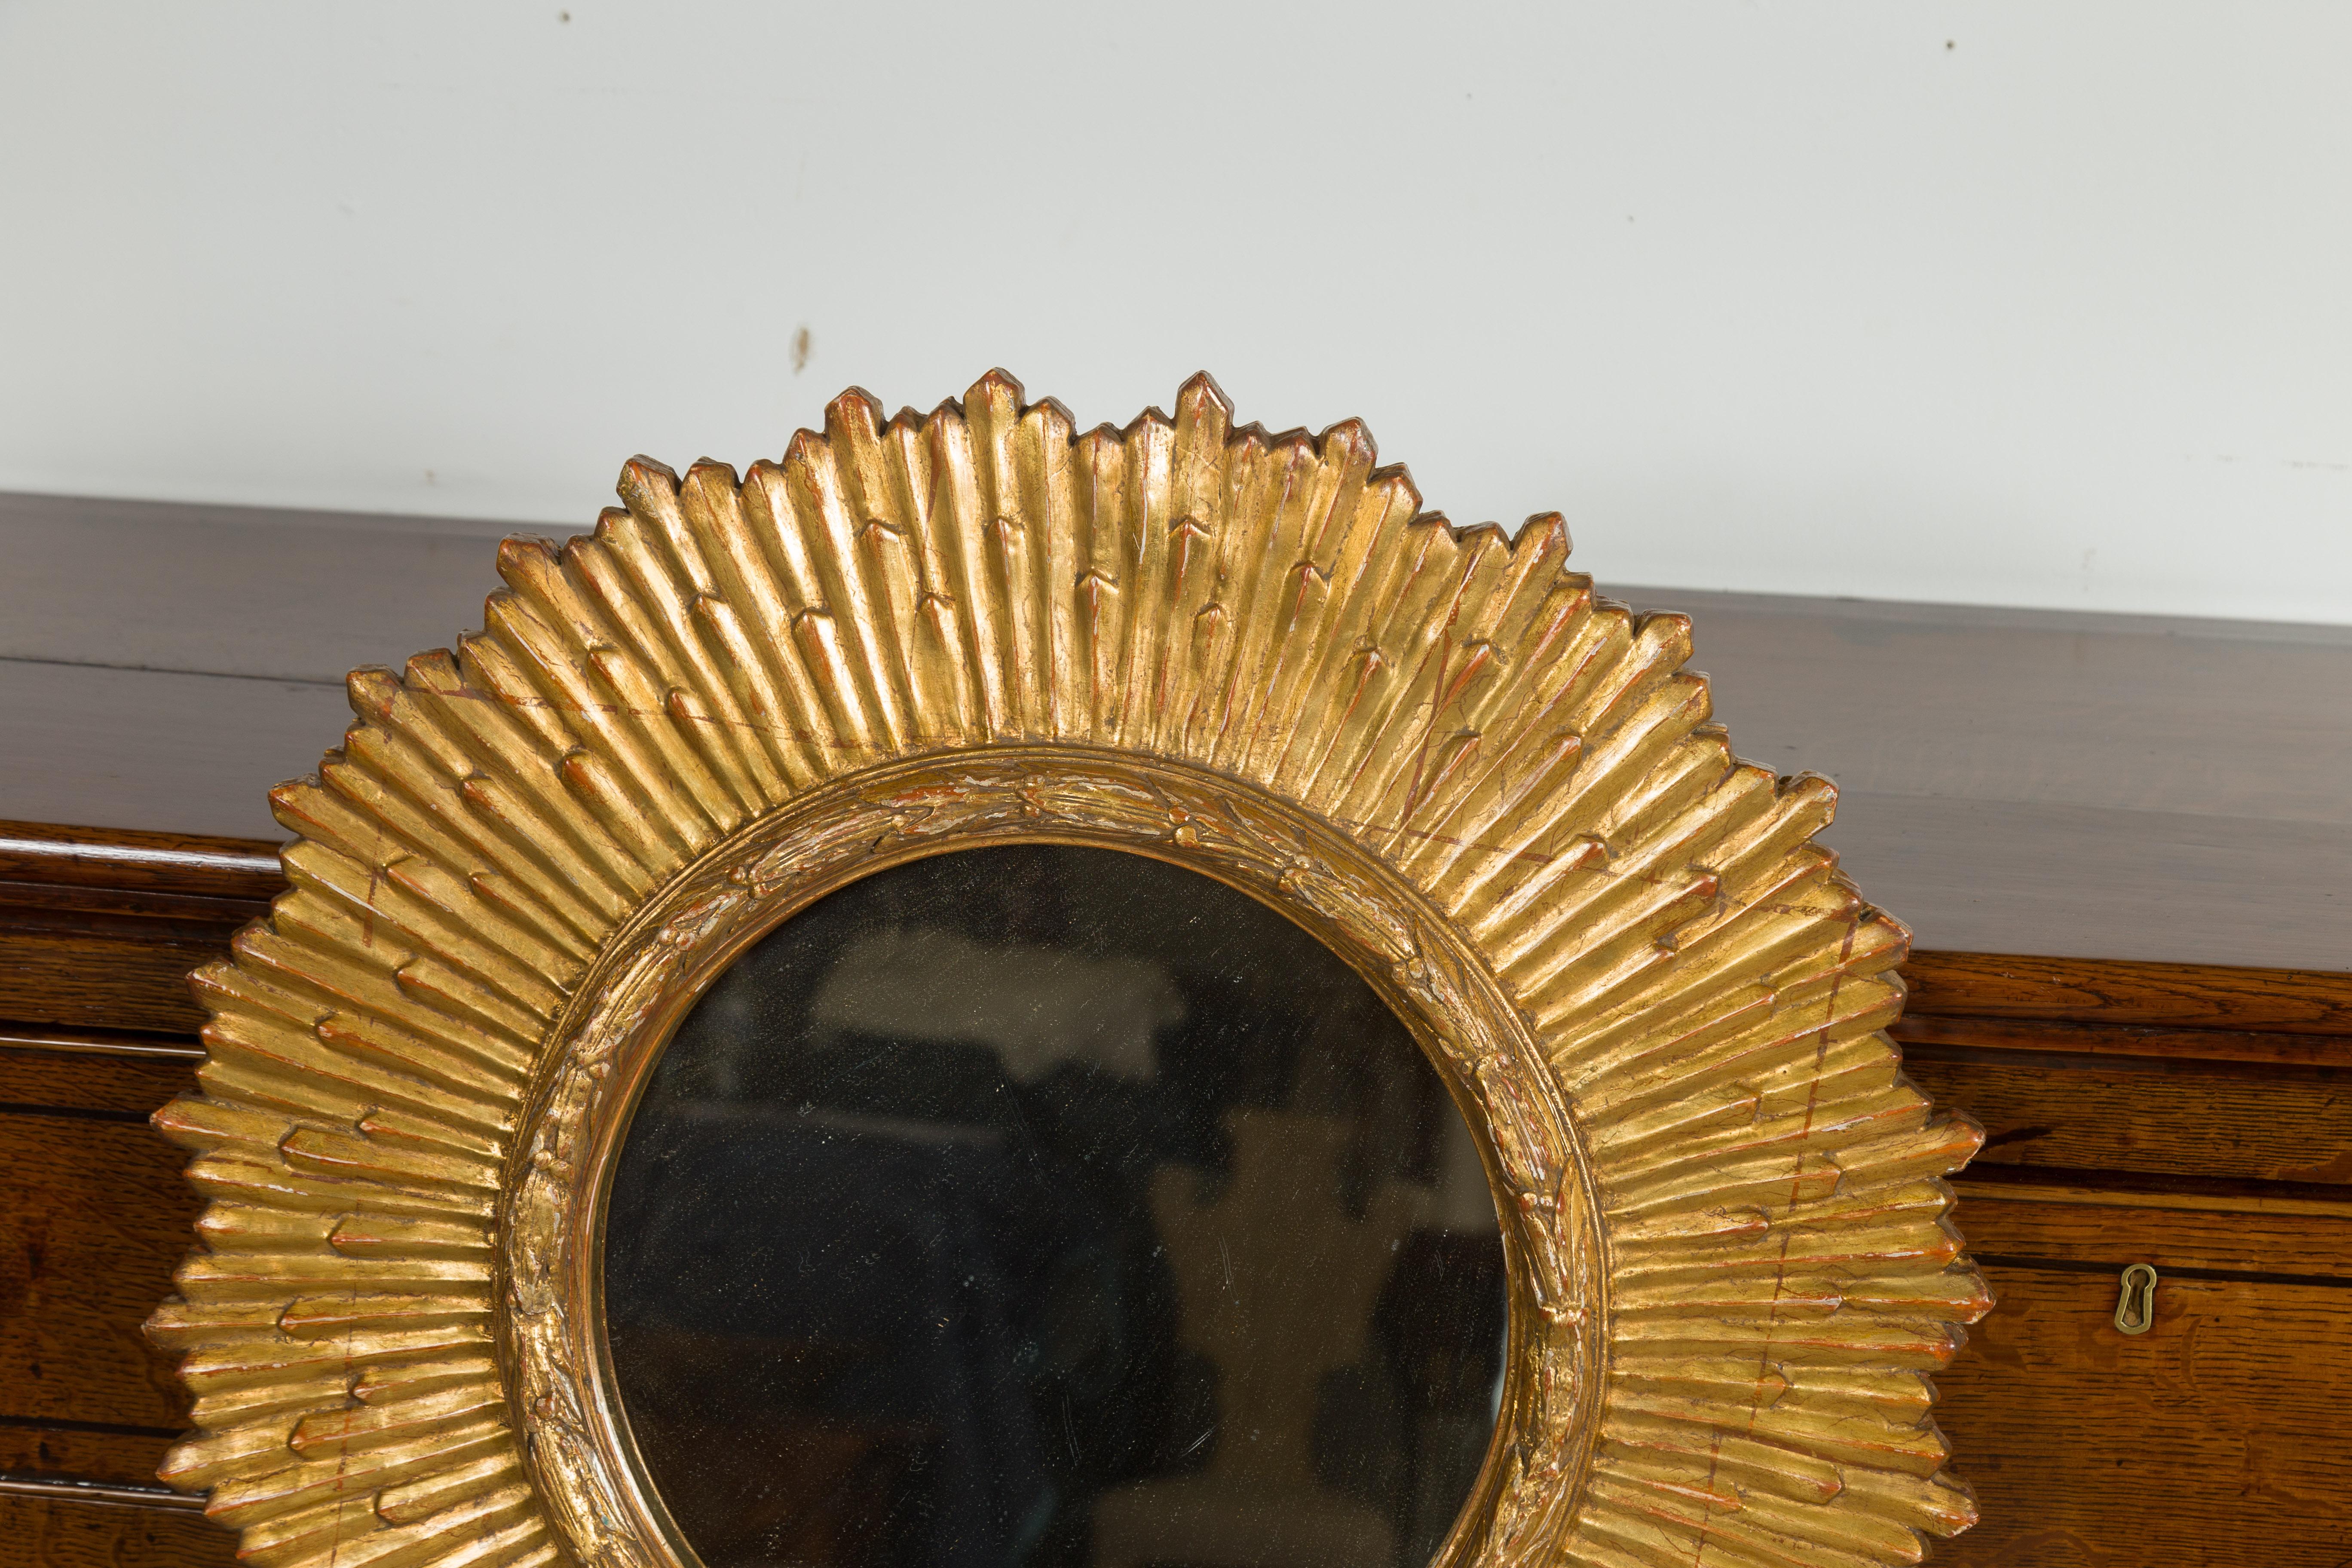 French Midcentury Giltwood Sunburst Mirror with Radiating Rays and Carved Frame In Good Condition For Sale In Atlanta, GA